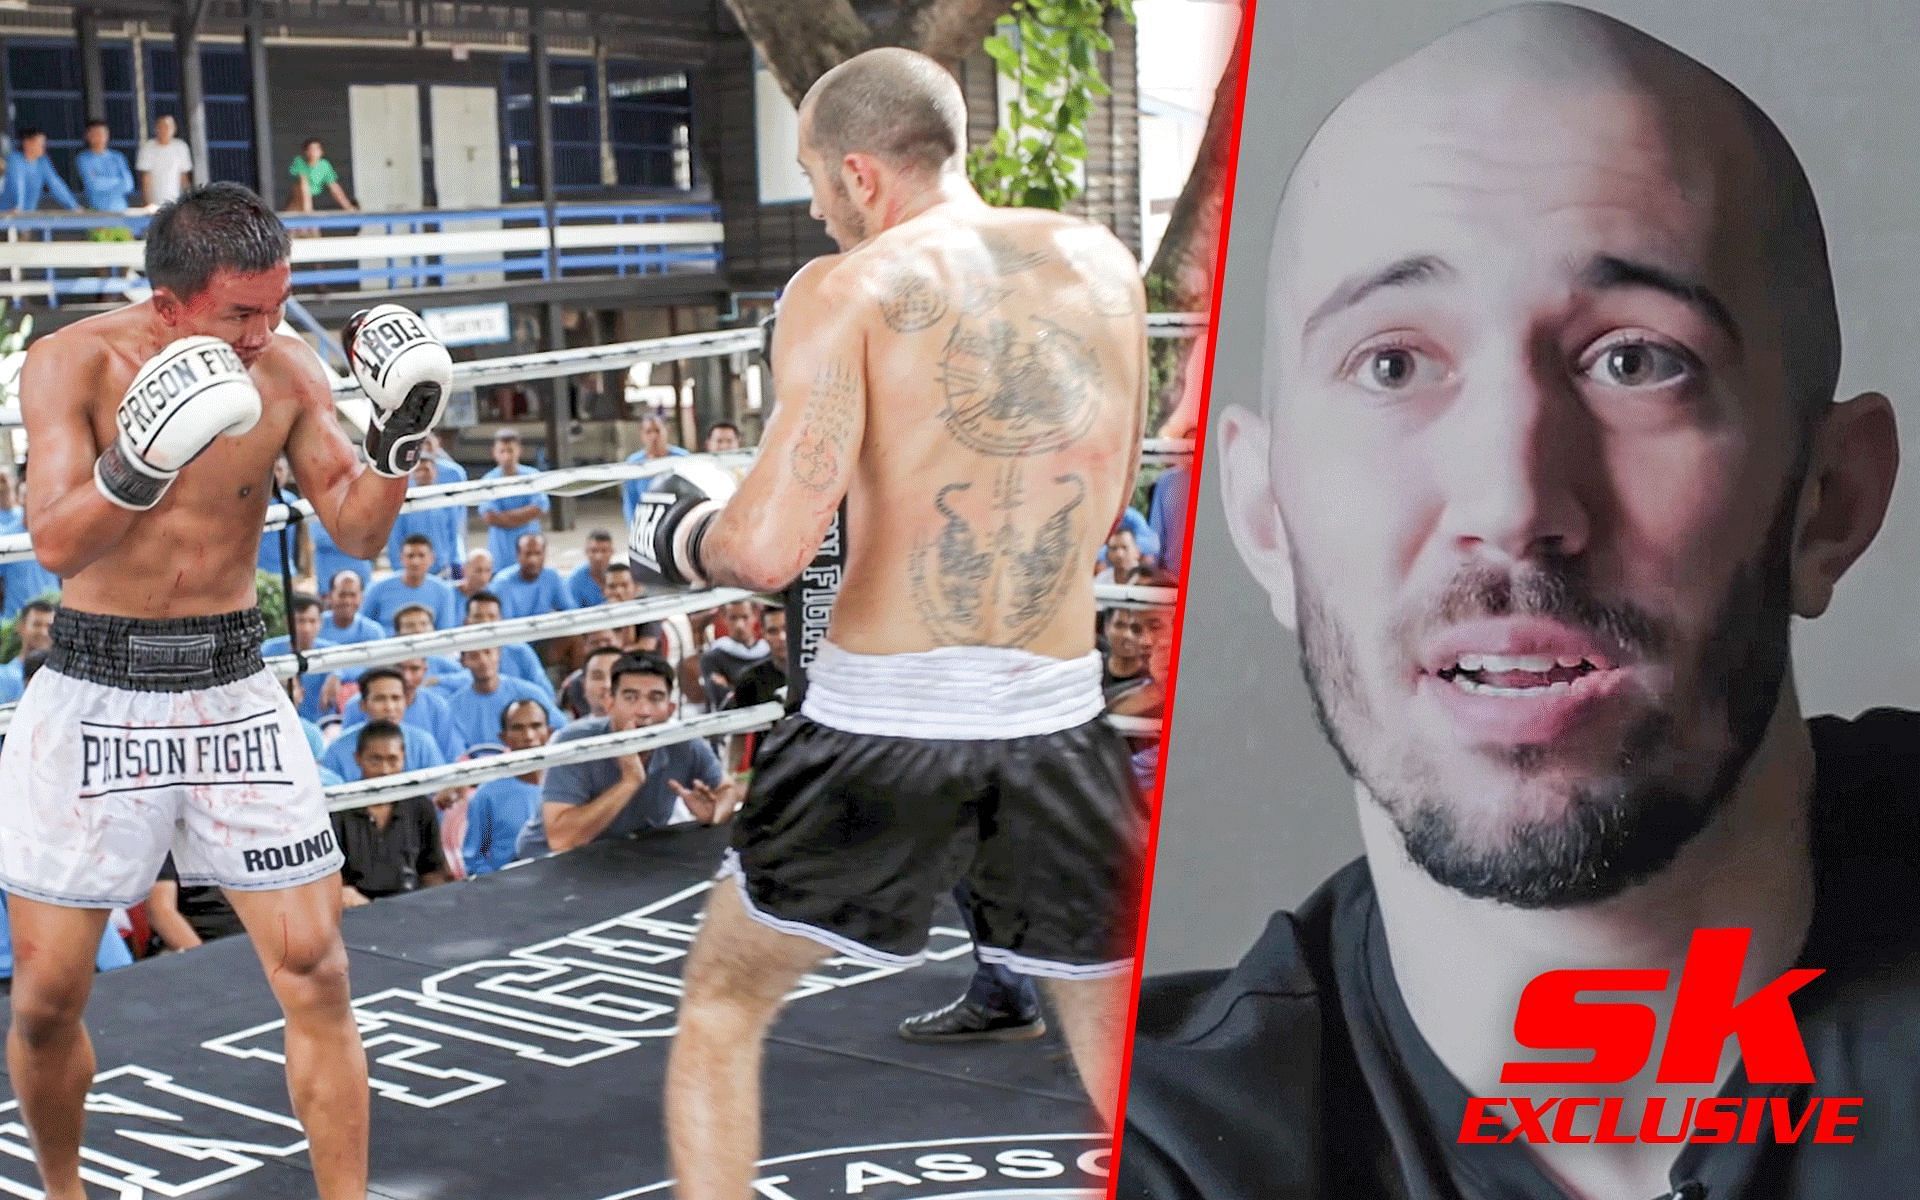 Lethwei fighter Dave Leduc revisits his experience of prison fighting and facing a man convicted for drug trafficking [Images via: Leduc Lethwei YouTube]